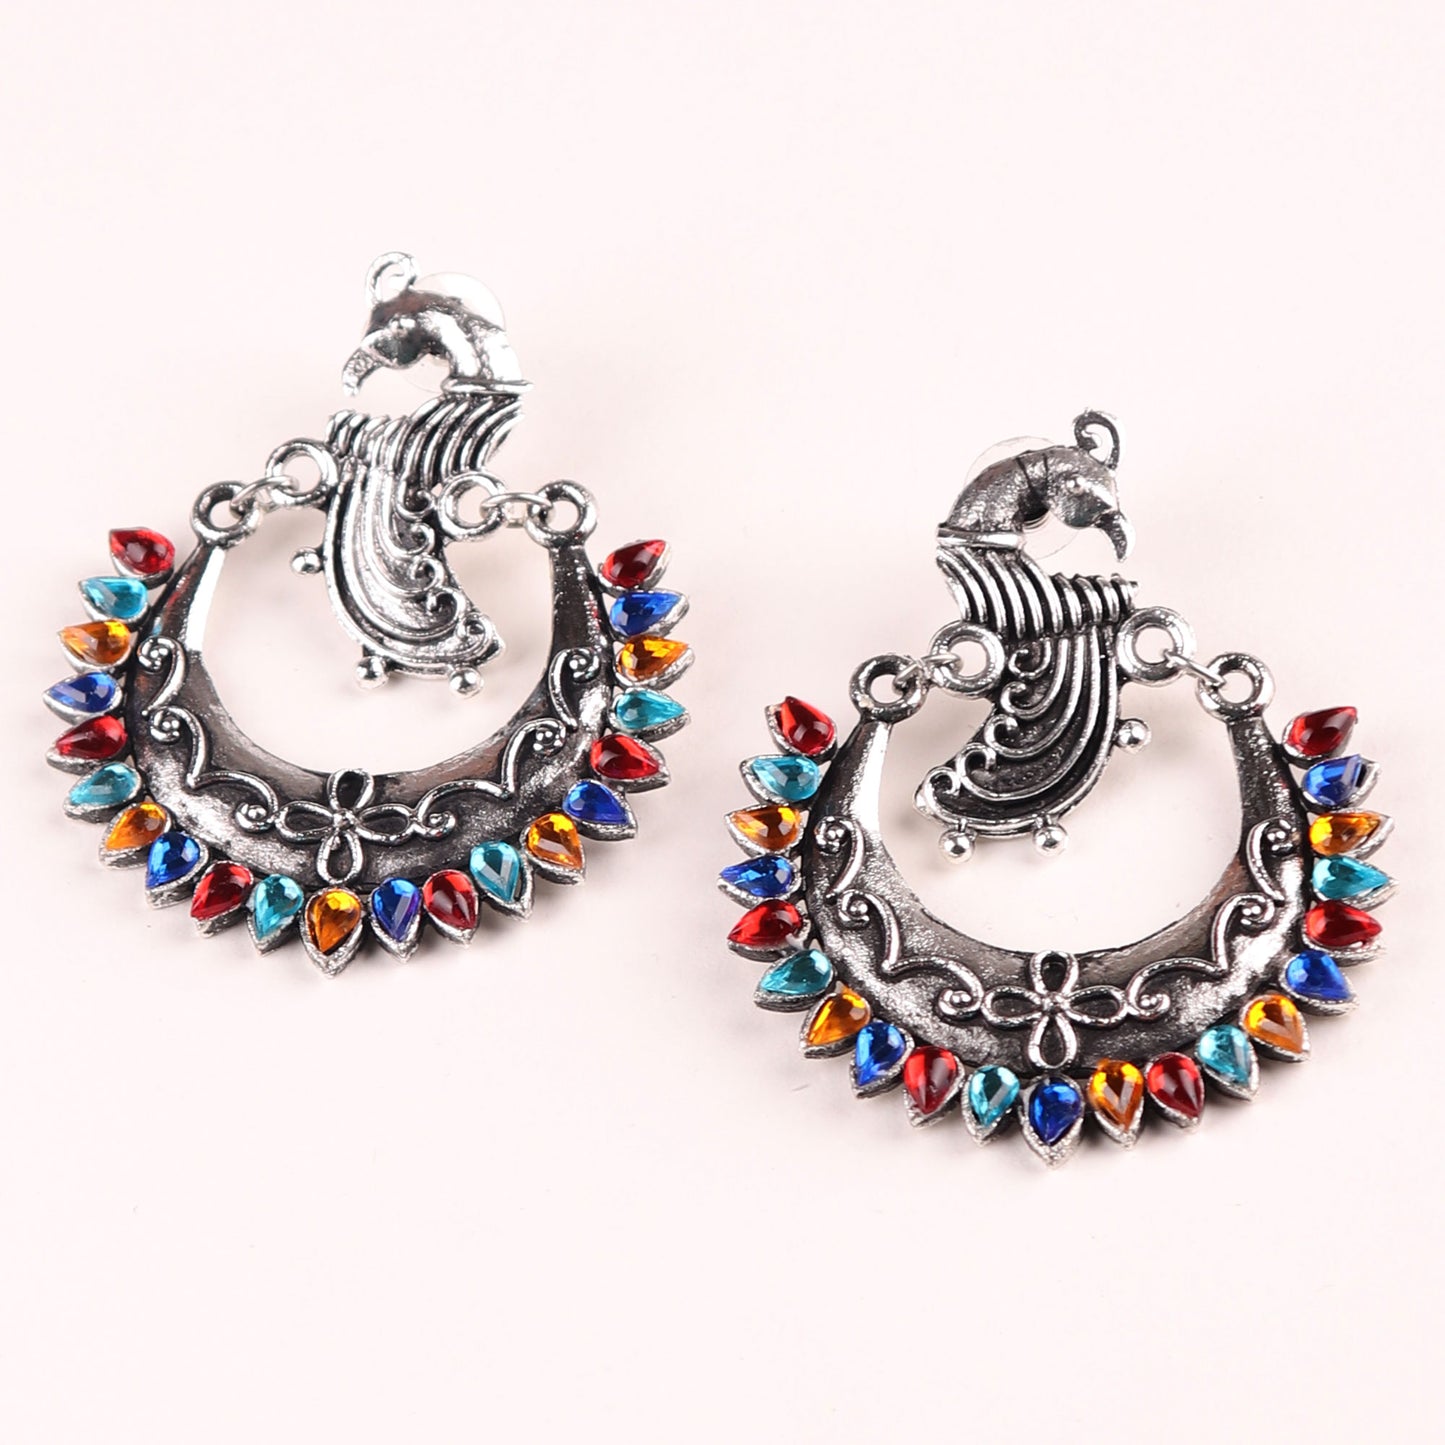 Earrings,The Peacock in the Moon in Multicolor - Cippele Multi Store